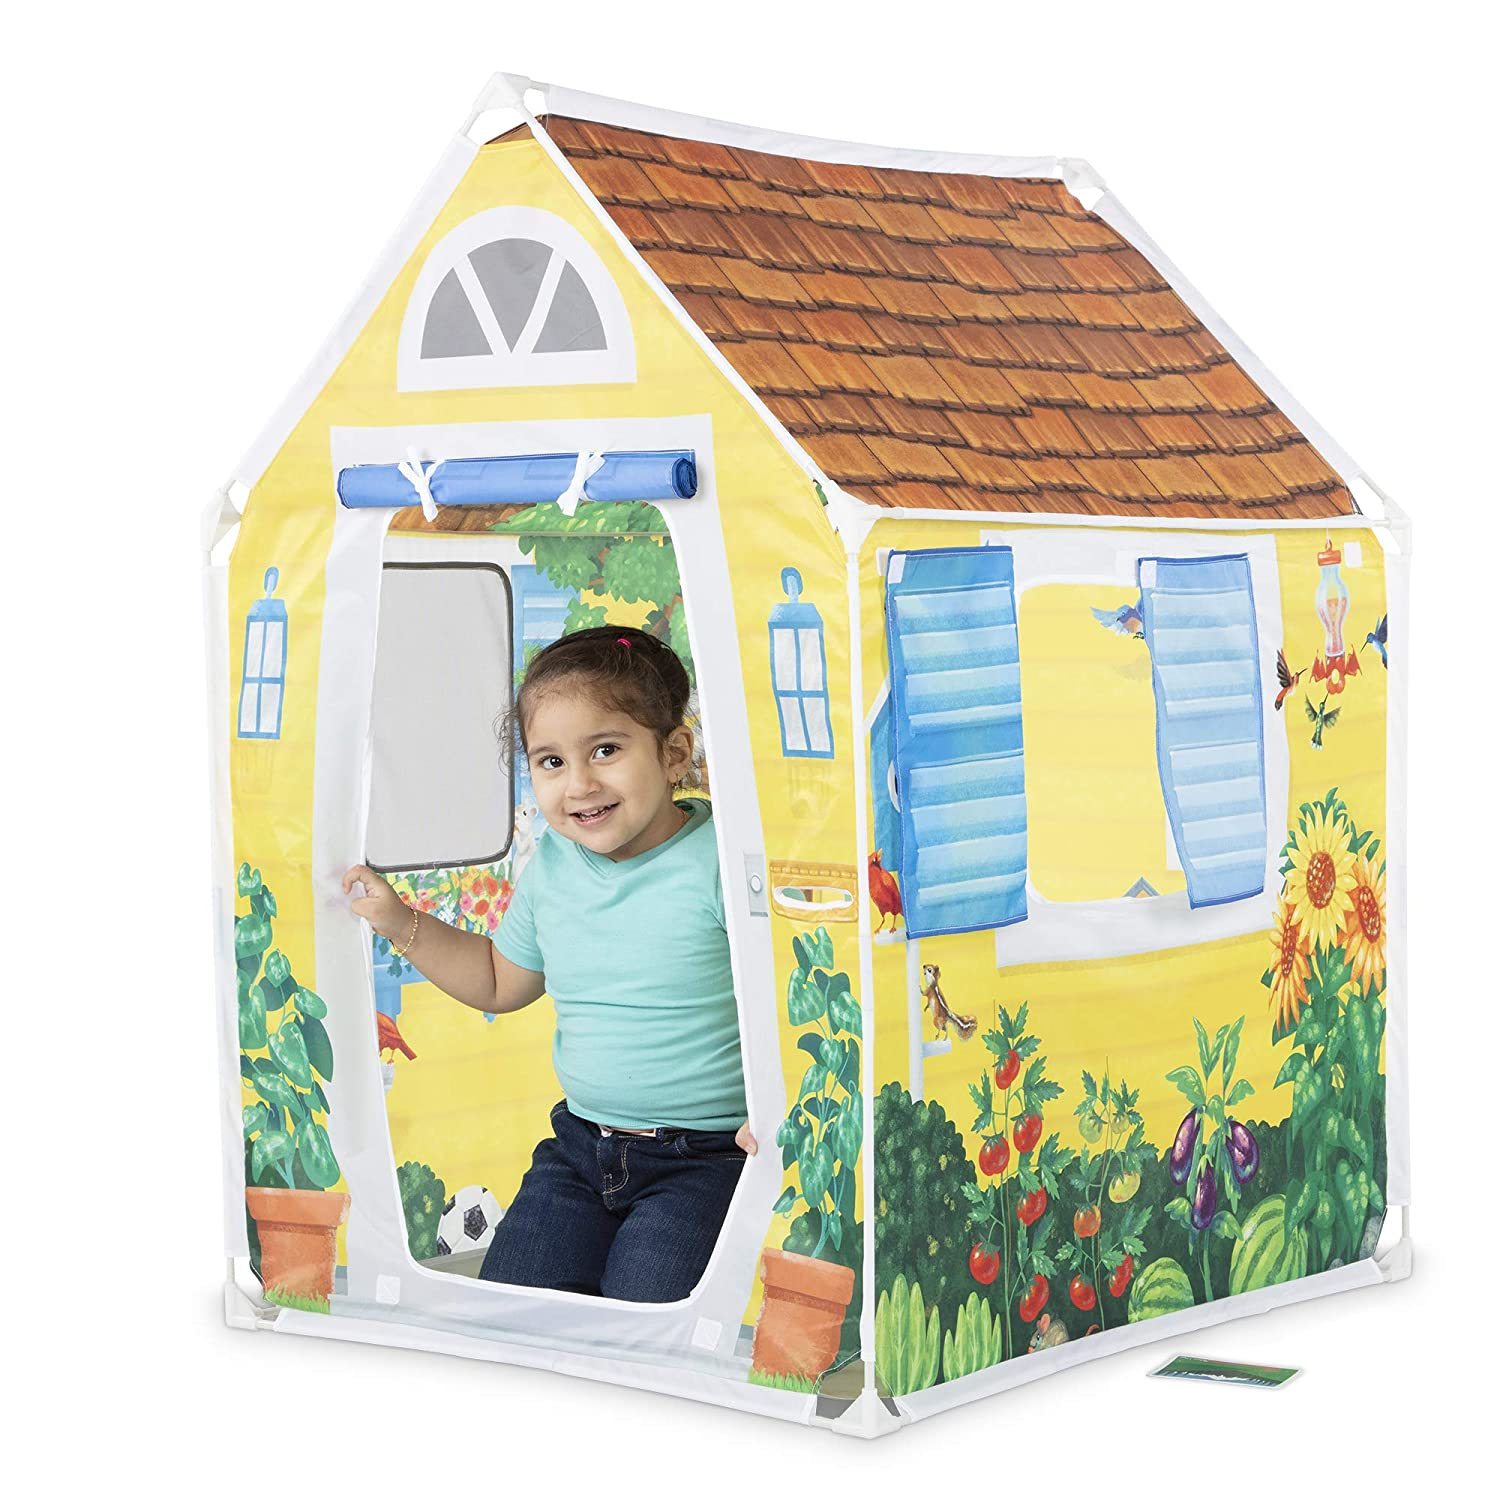 Melissa & Doug Cozy Cottage Fabric Play Tent And Storage Tote